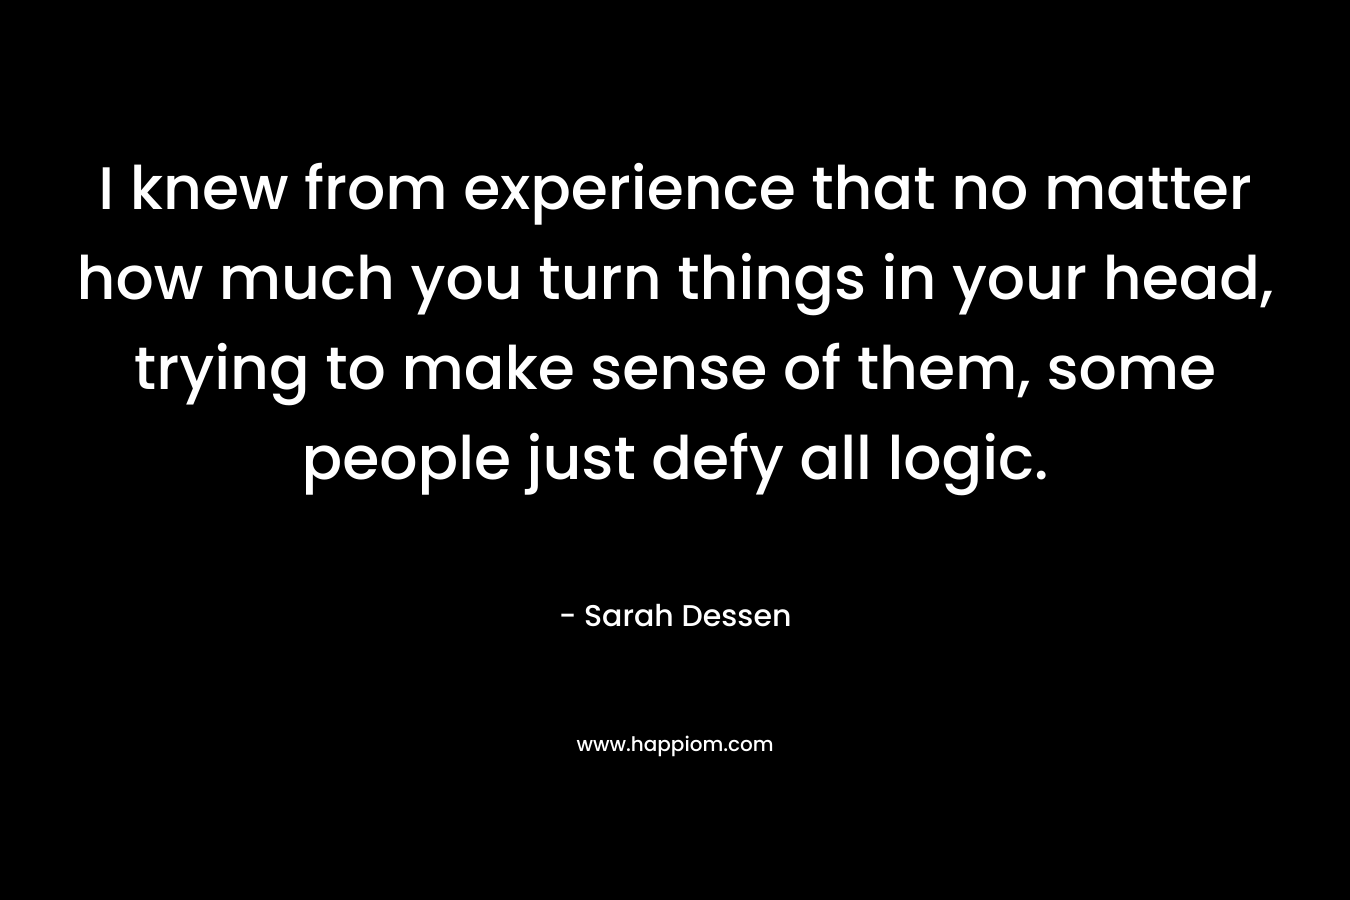 I knew from experience that no matter how much you turn things in your head, trying to make sense of them, some people just defy all logic. – Sarah Dessen